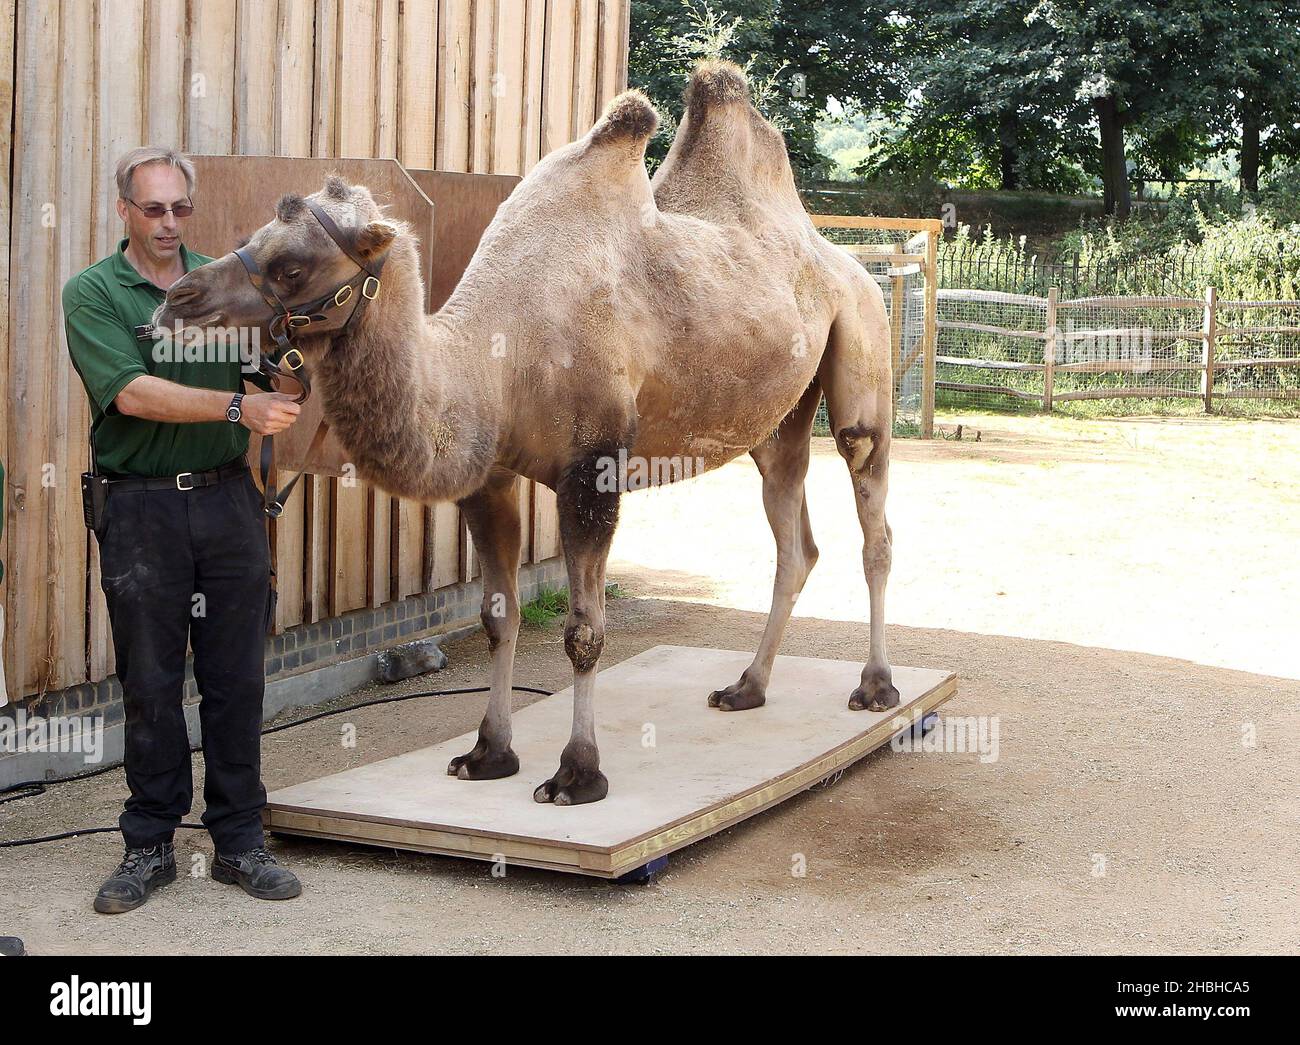 Gengkis, the Camel, stands on a set of electronic scales during the annual stock take of weights and sizes, at the London Zoo in Regents Park in central London. Stock Photo